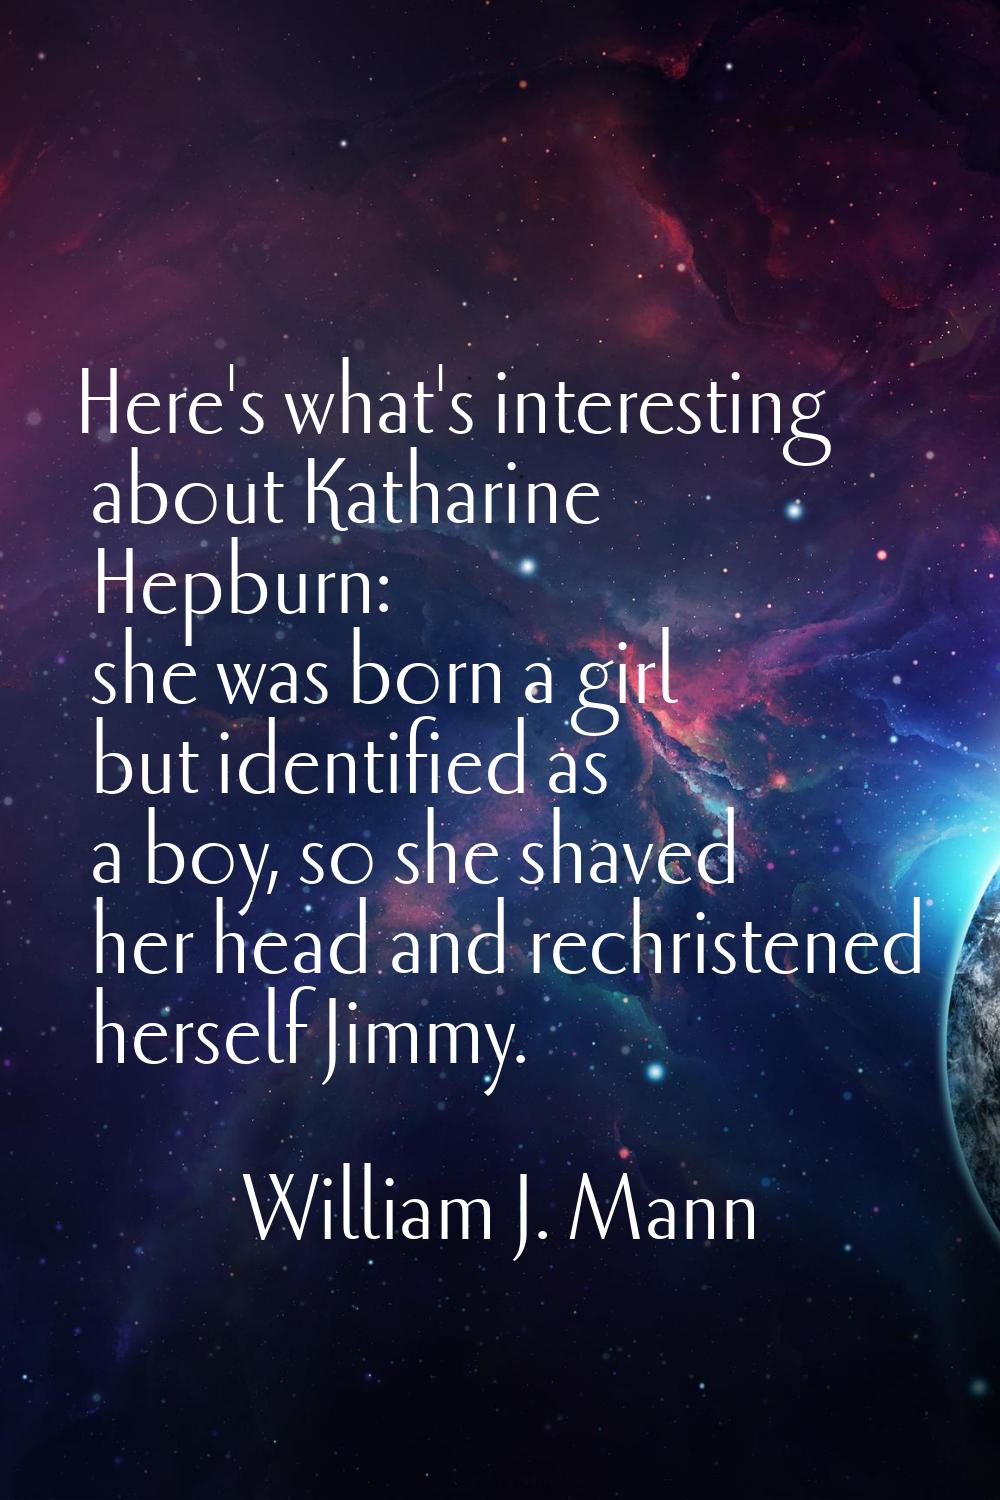 Here's what's interesting about Katharine Hepburn: she was born a girl but identified as a boy, so 